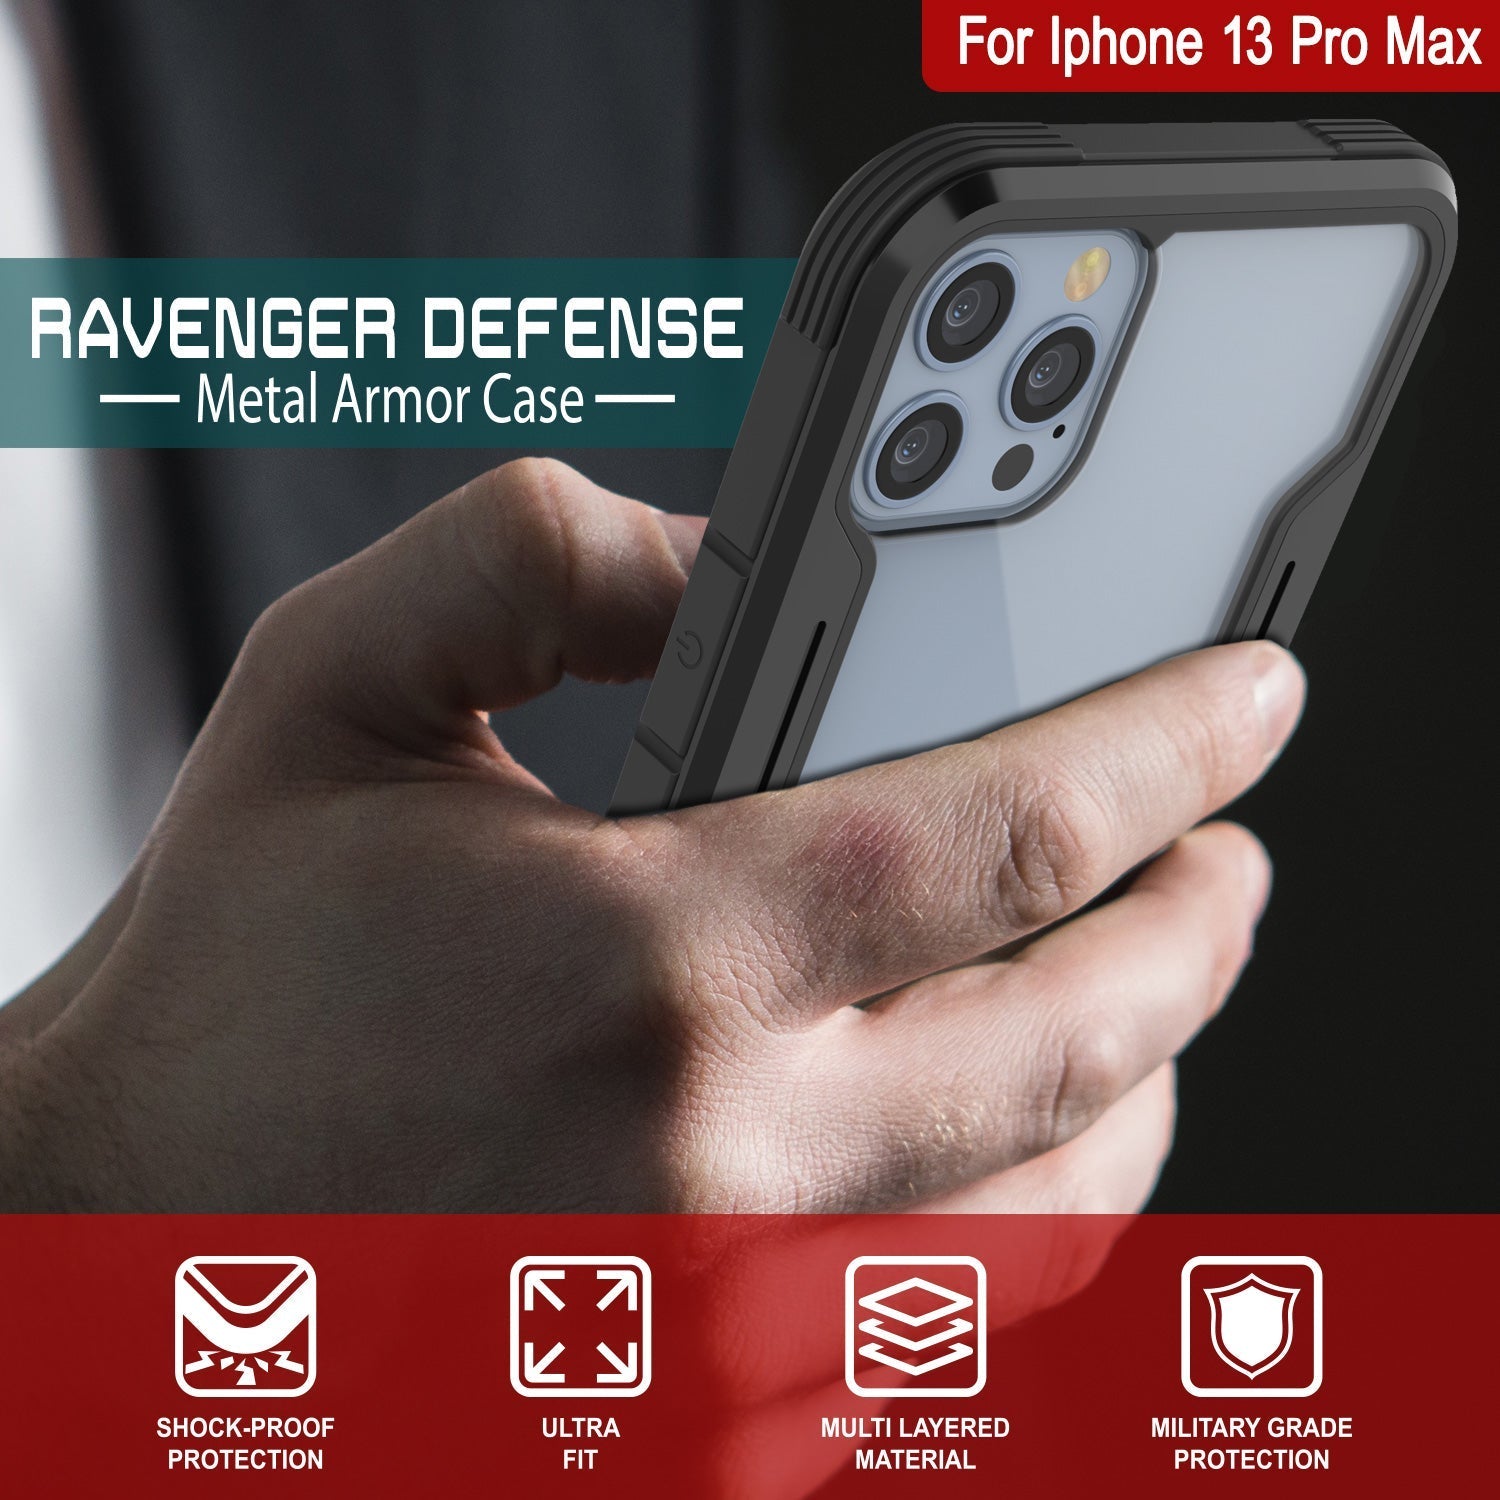 Punkcase iPhone 14 Pro Max Ravenger MAG Defense Case Protective Military Grade Multilayer Cover [Black]